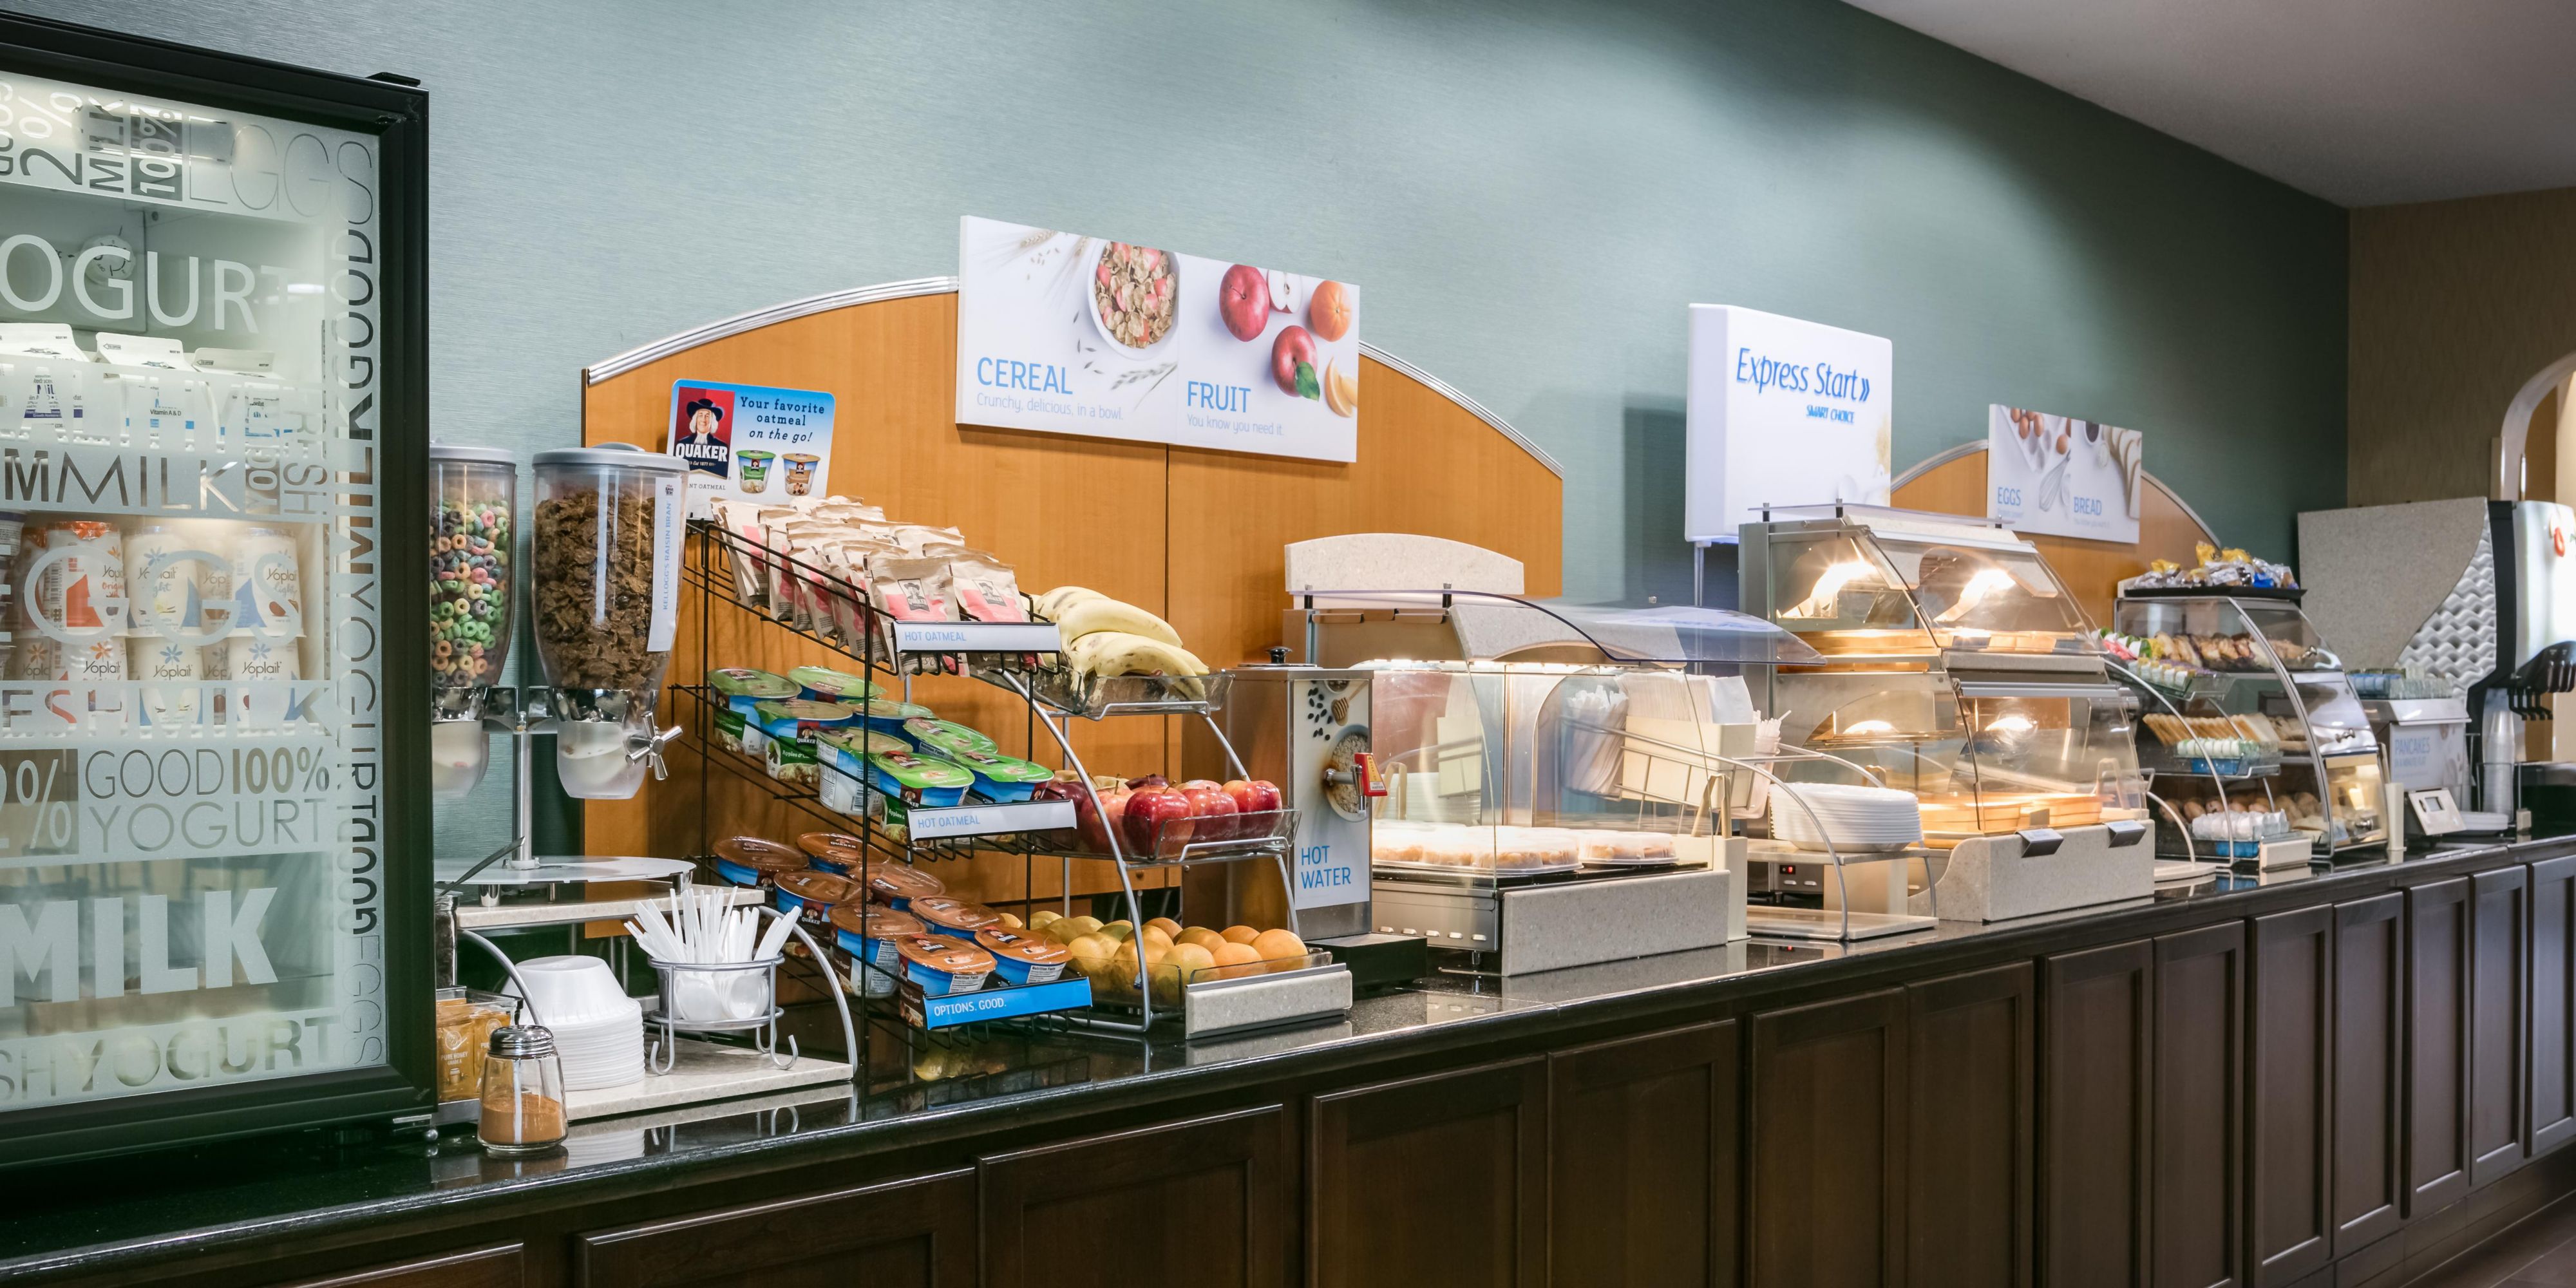 You can be sure to start your morning right with grab and go breakfast in our lobby. Our hotel features a complimentary "Express Start" breakfast with individually wrapped items and freshly brewed coffee.